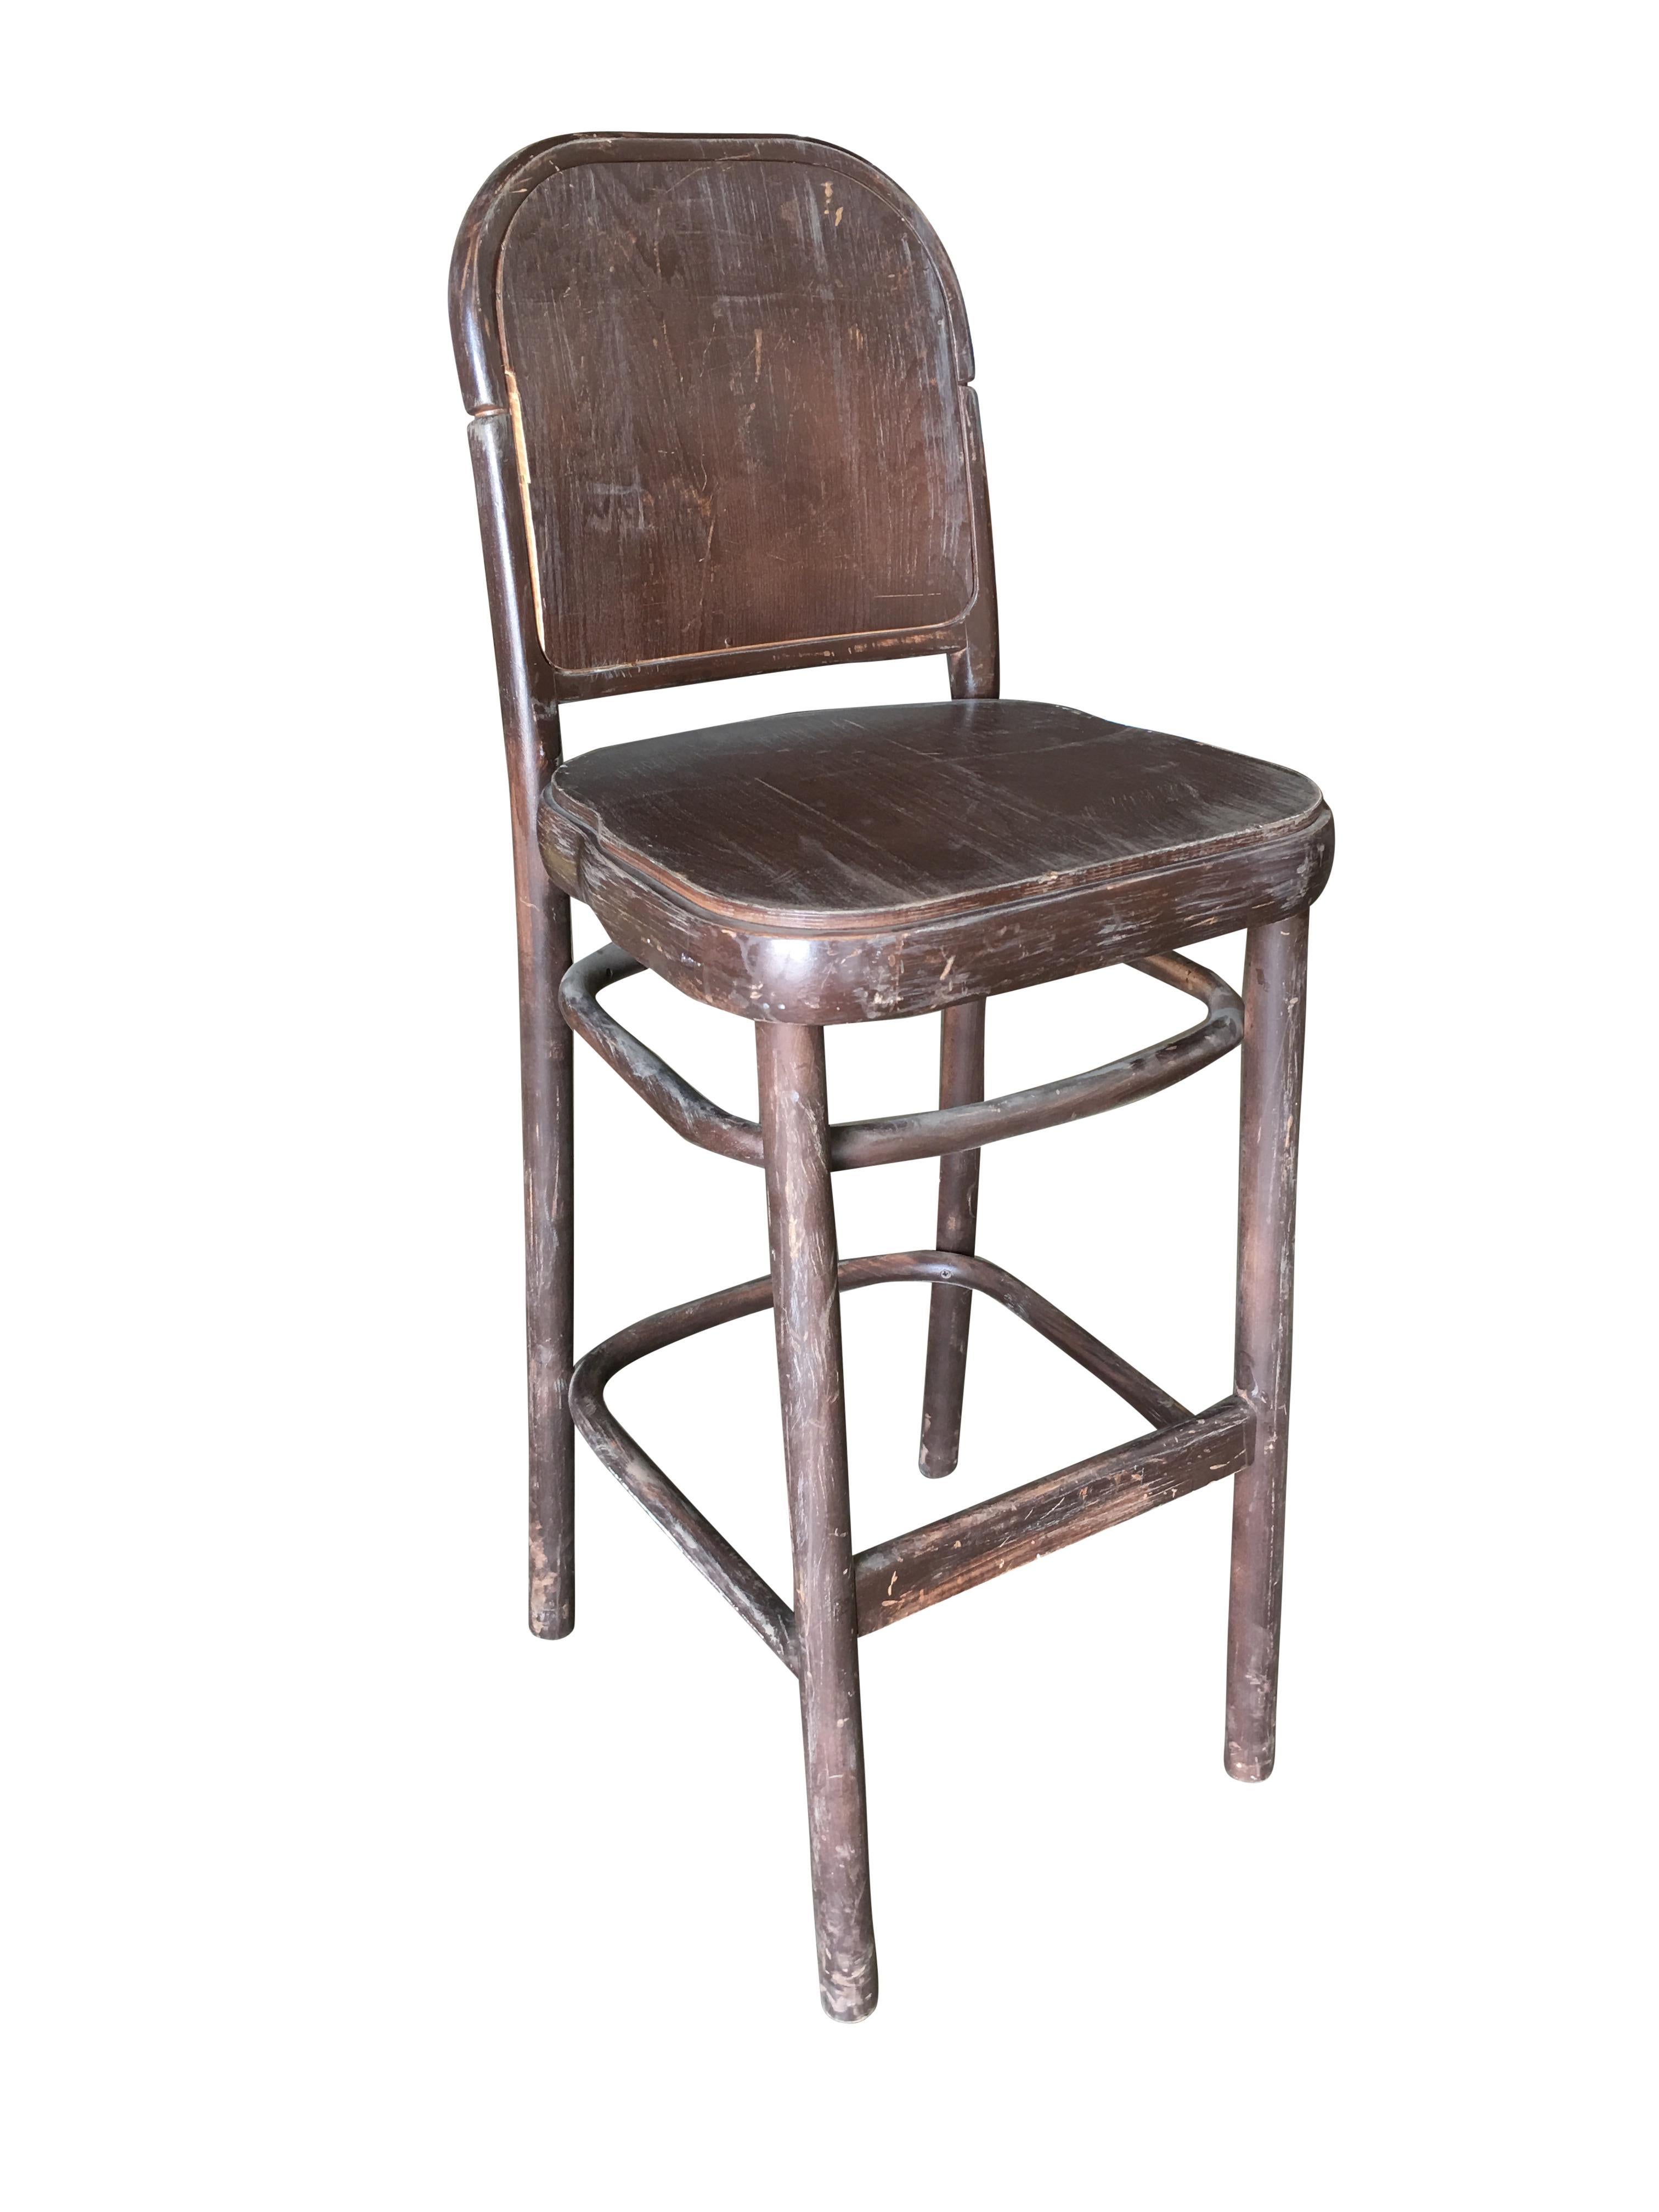 Set of eight bentwood bar stools fashioned after the stylings made famous by Thonet. The bar stools feature a wood seat and backboard along with a footrest.